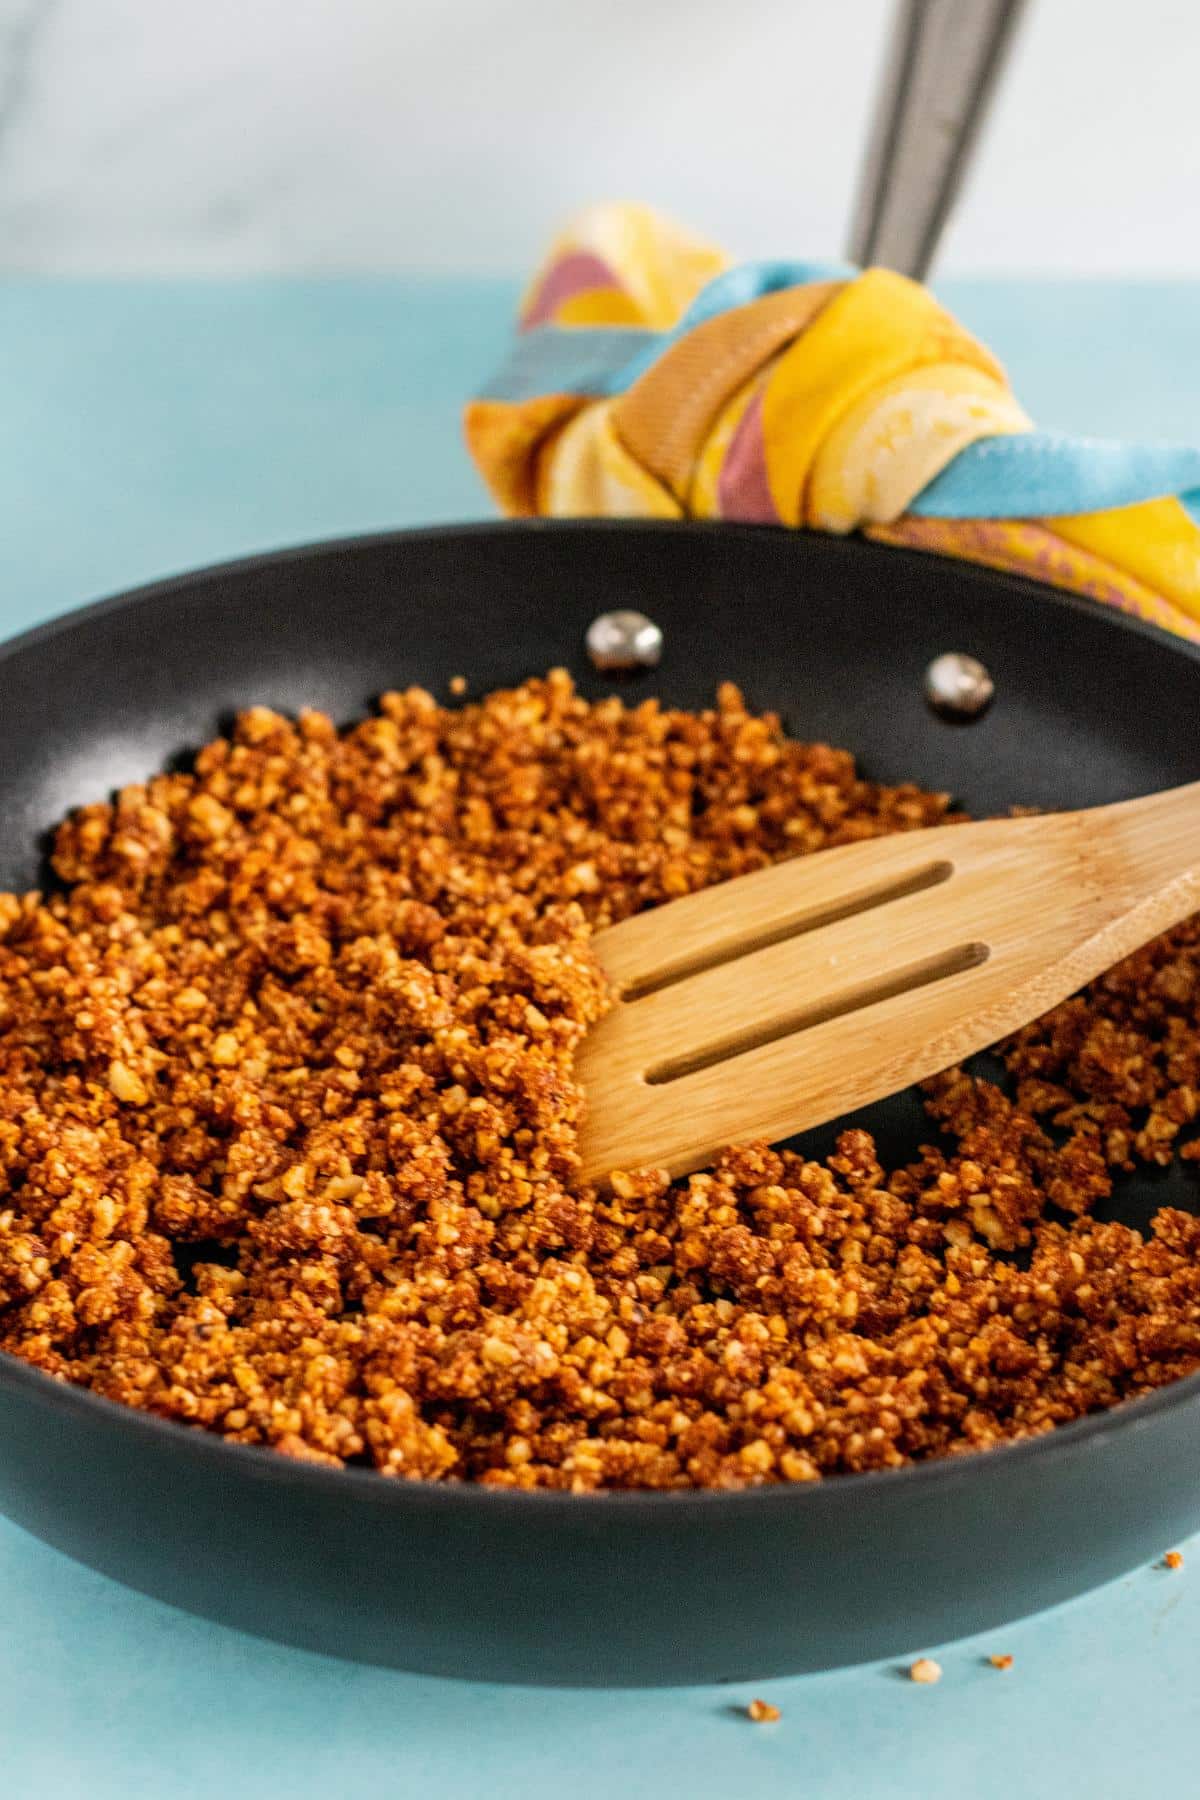 Heating the walnut meat crumbles in a skillet.